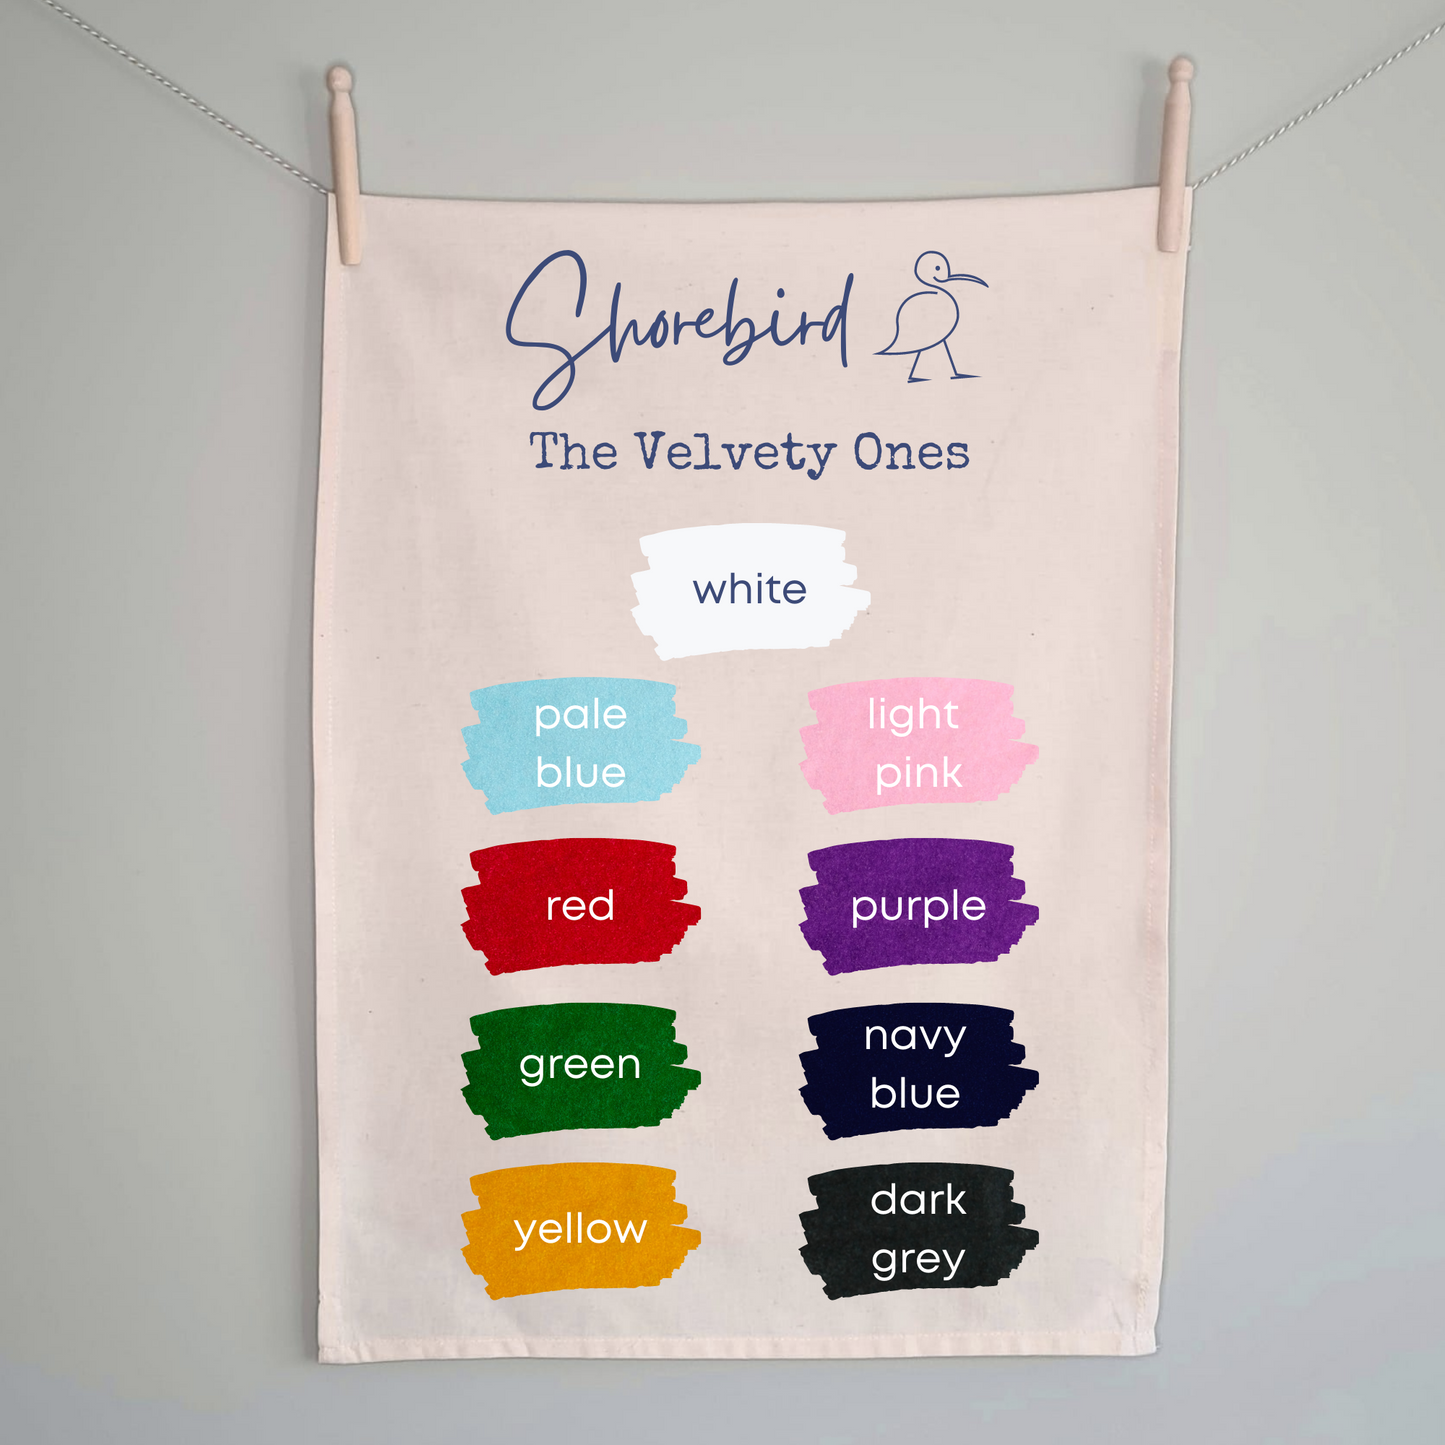 You Are Going To Be A Granny Tea Towel - 100% Organic Cotton